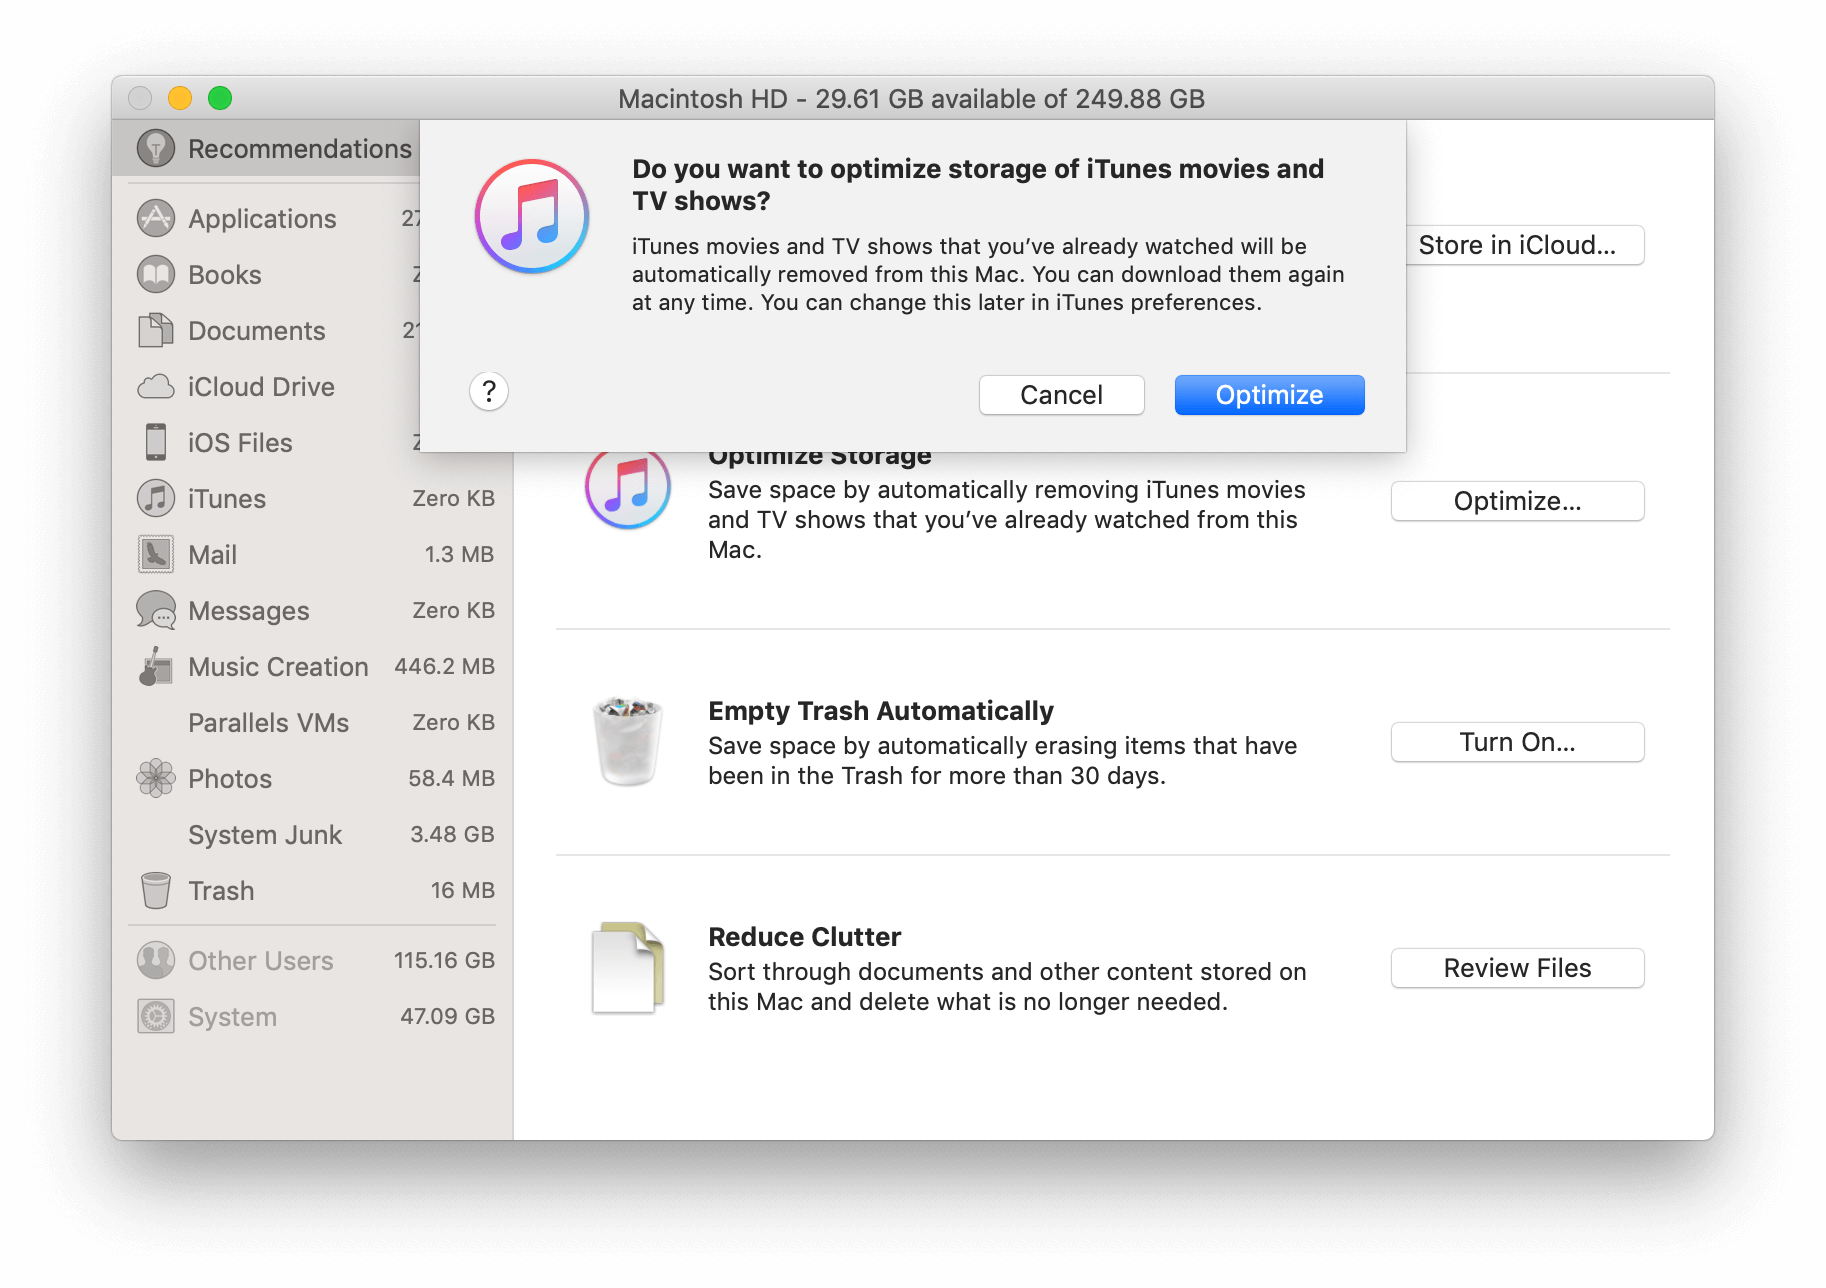 Confirmation window to optimize storage of iTunes